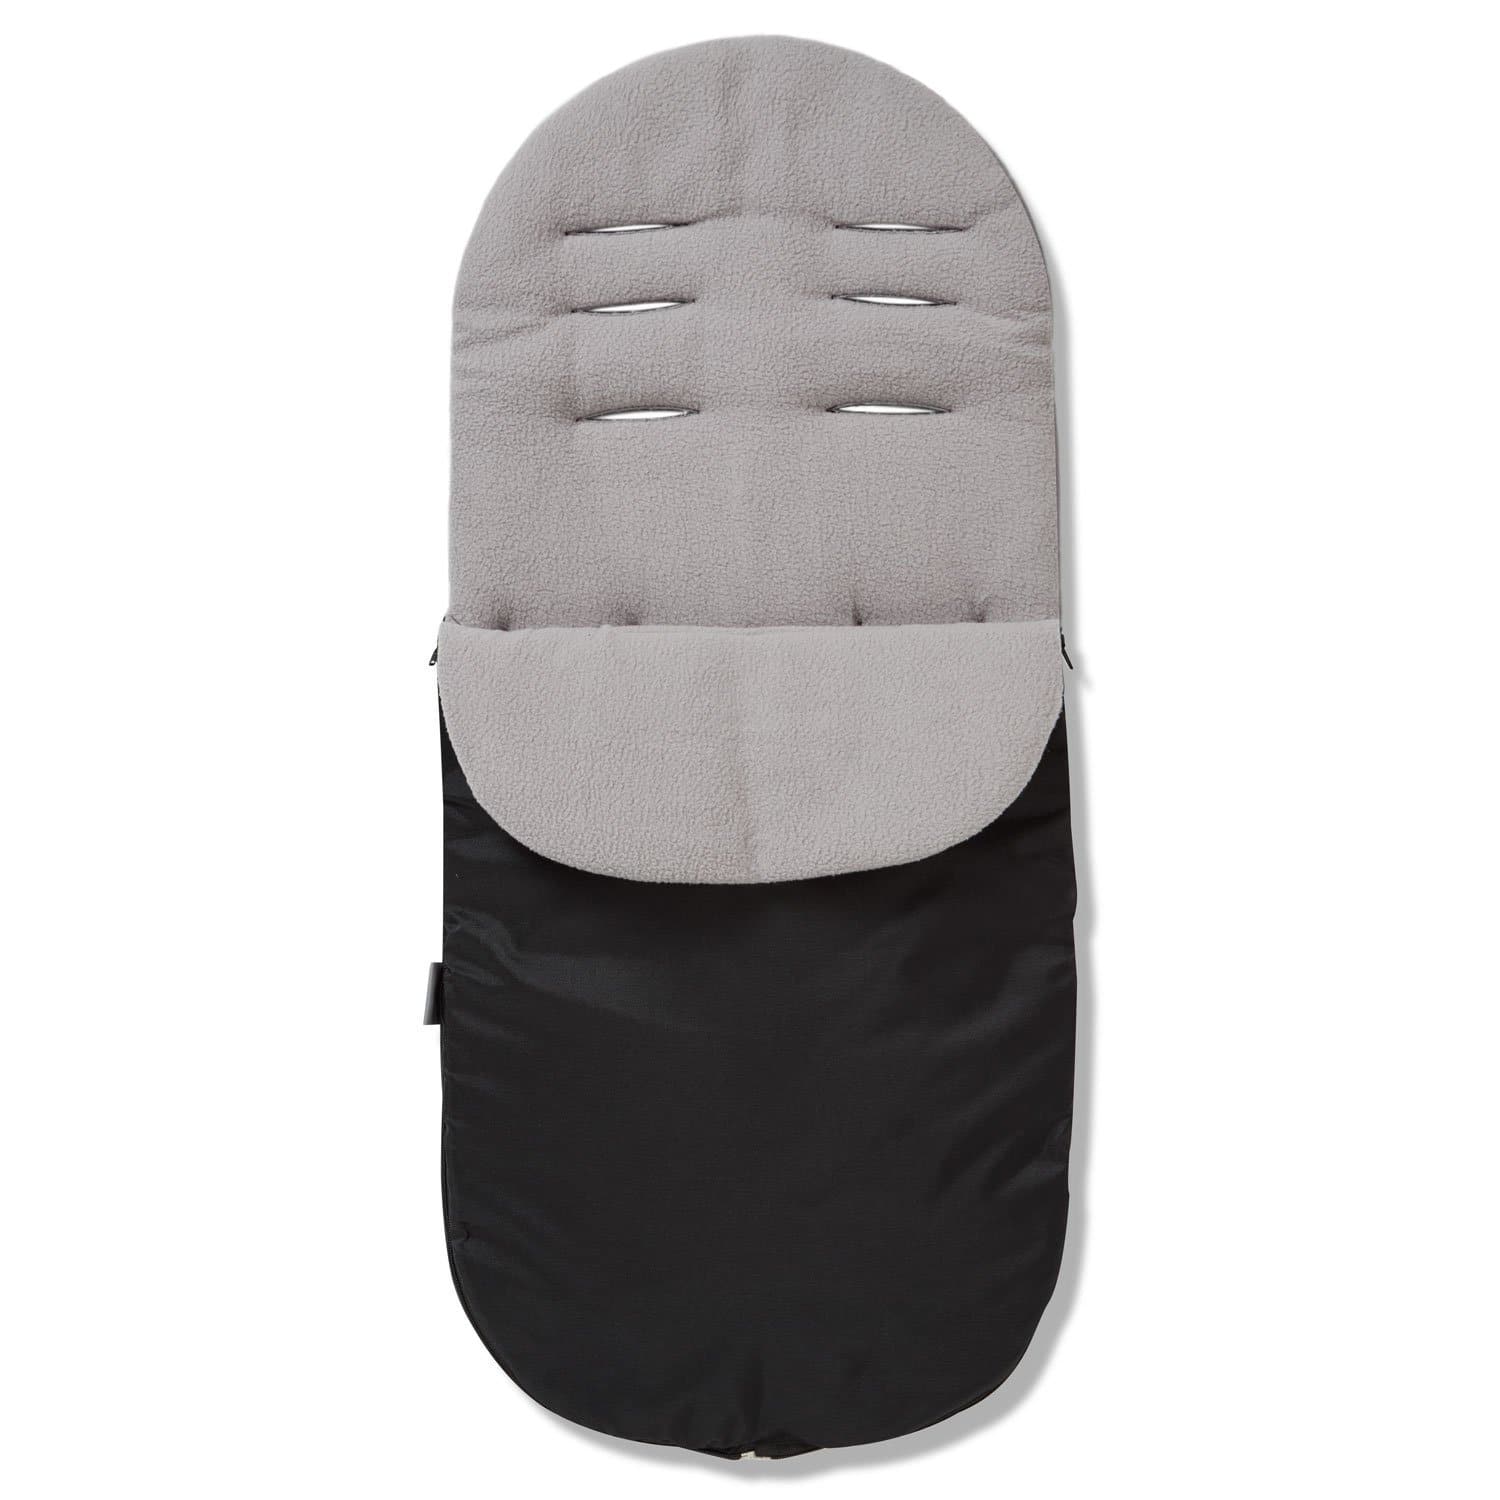 Footmuff / Cosy Toes Compatible with iCandy - Grey / Fits All Models | For Your Little One